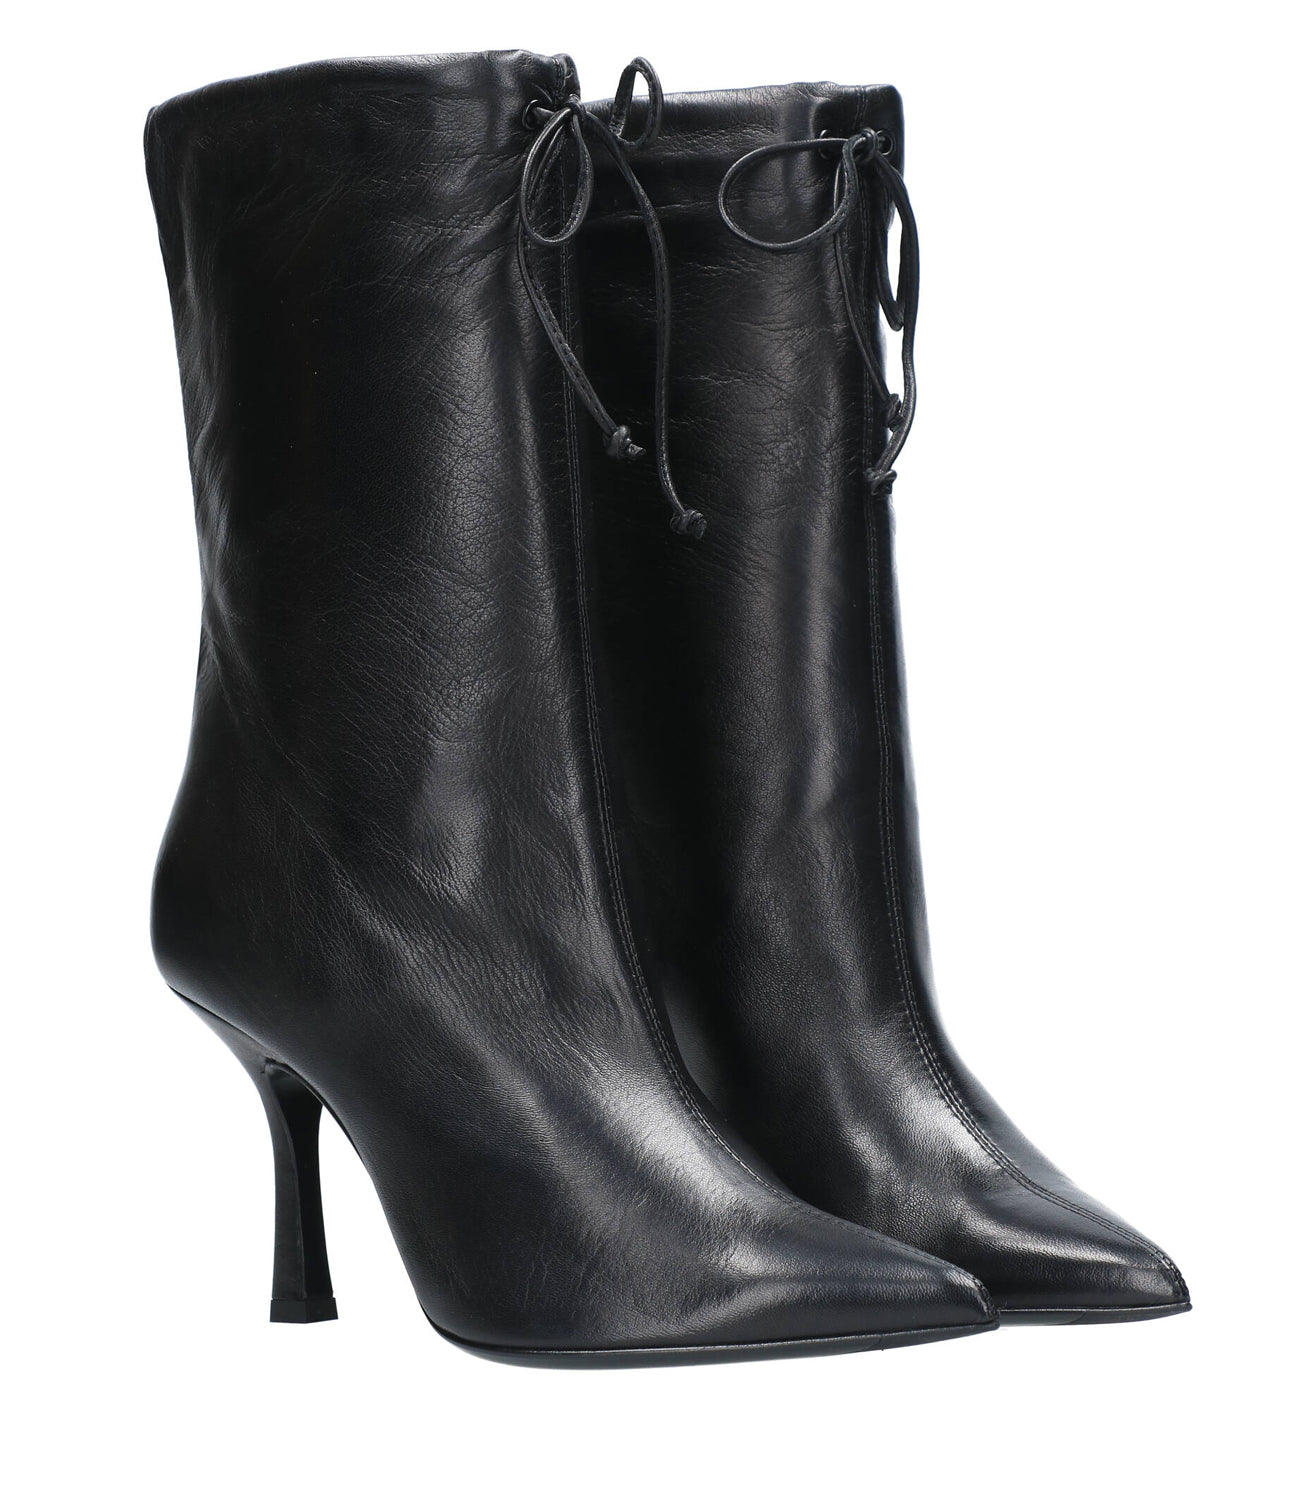 Black ankle boot